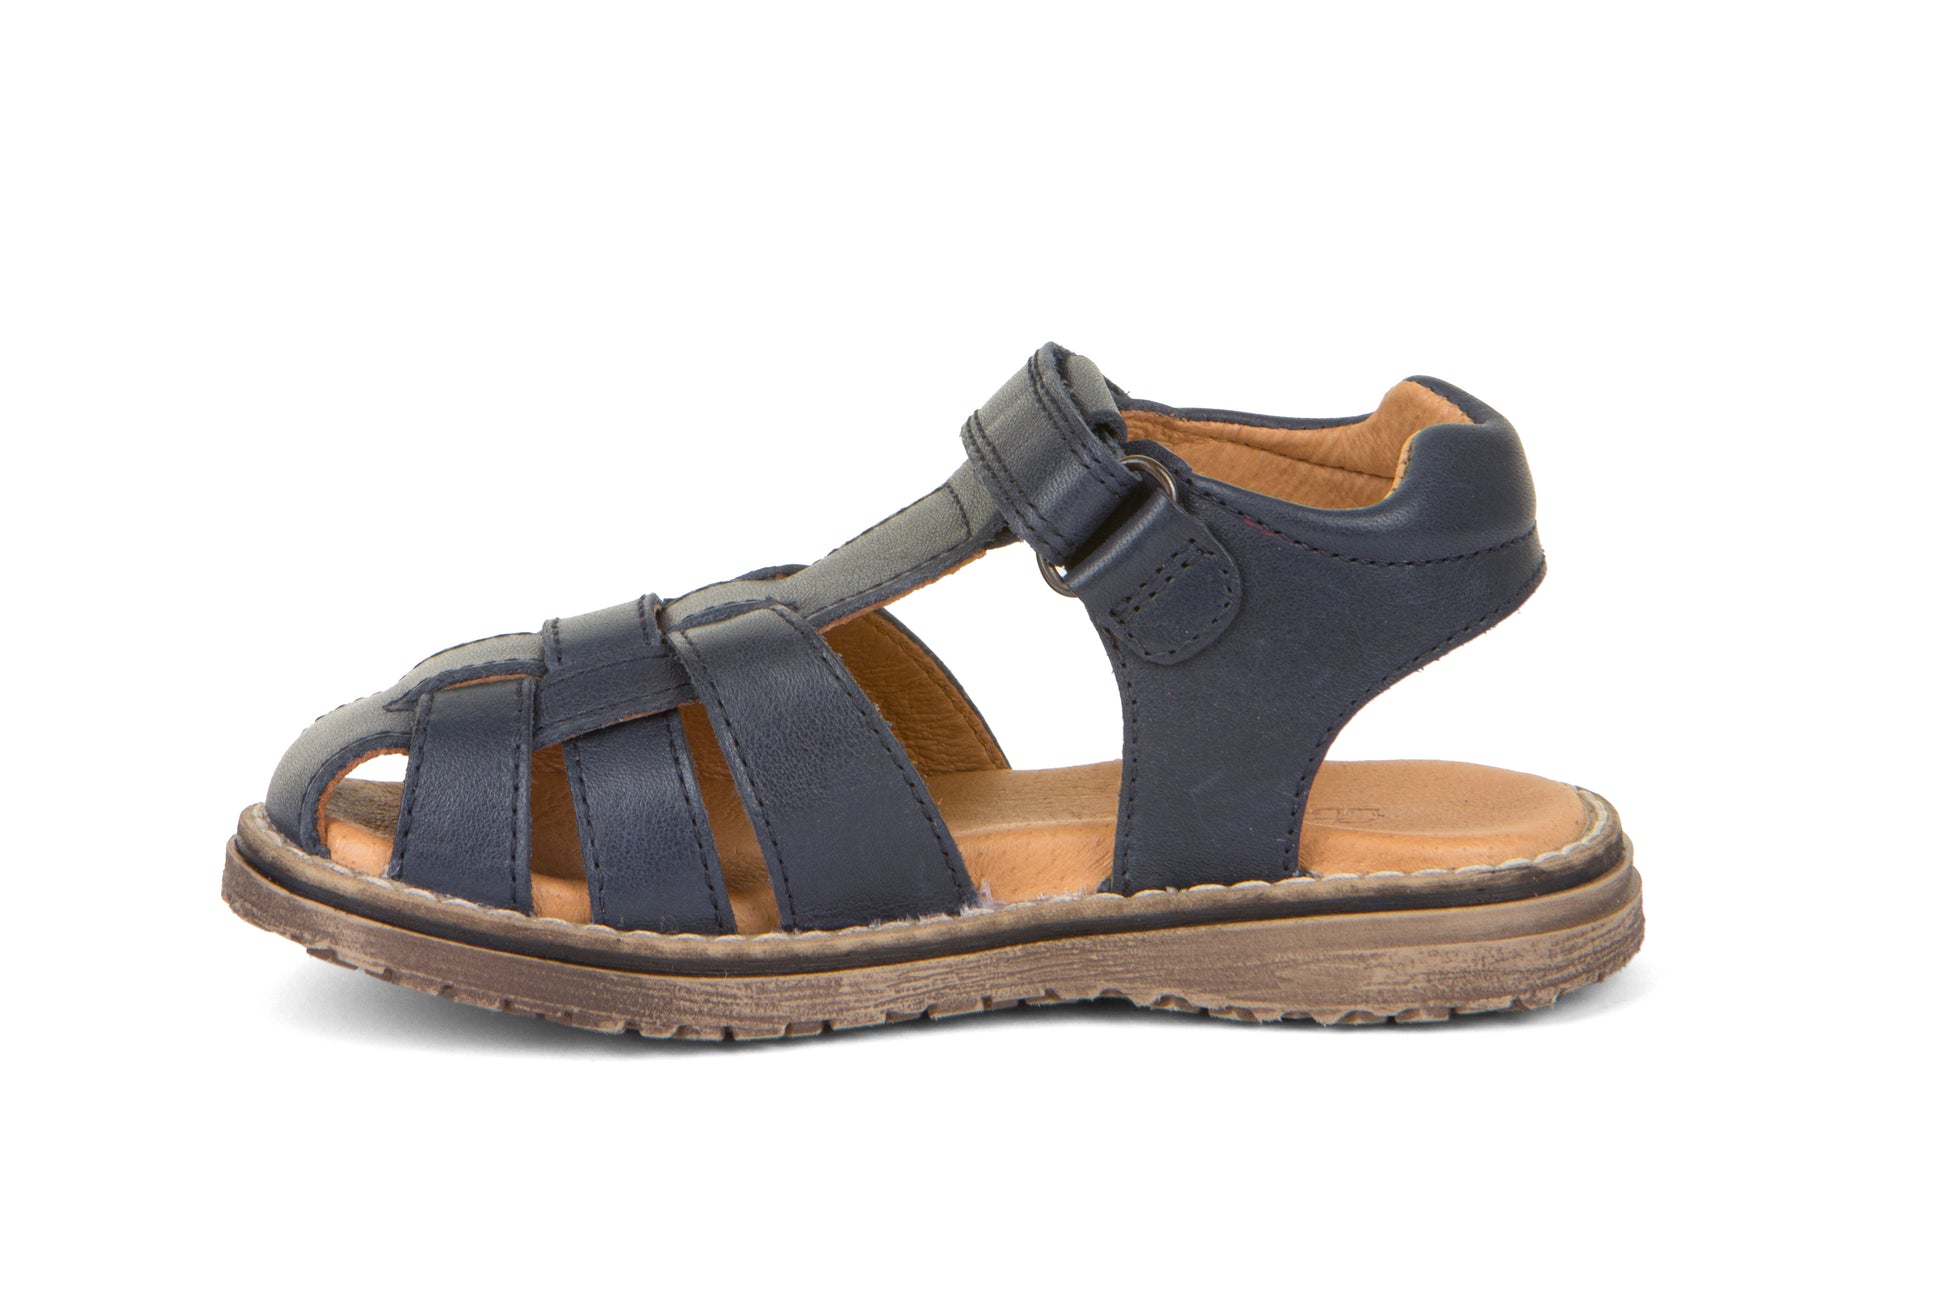 A boys sandal by Froddo, style G31500233 Darios, in navy, velcro fastening. Right inside view.